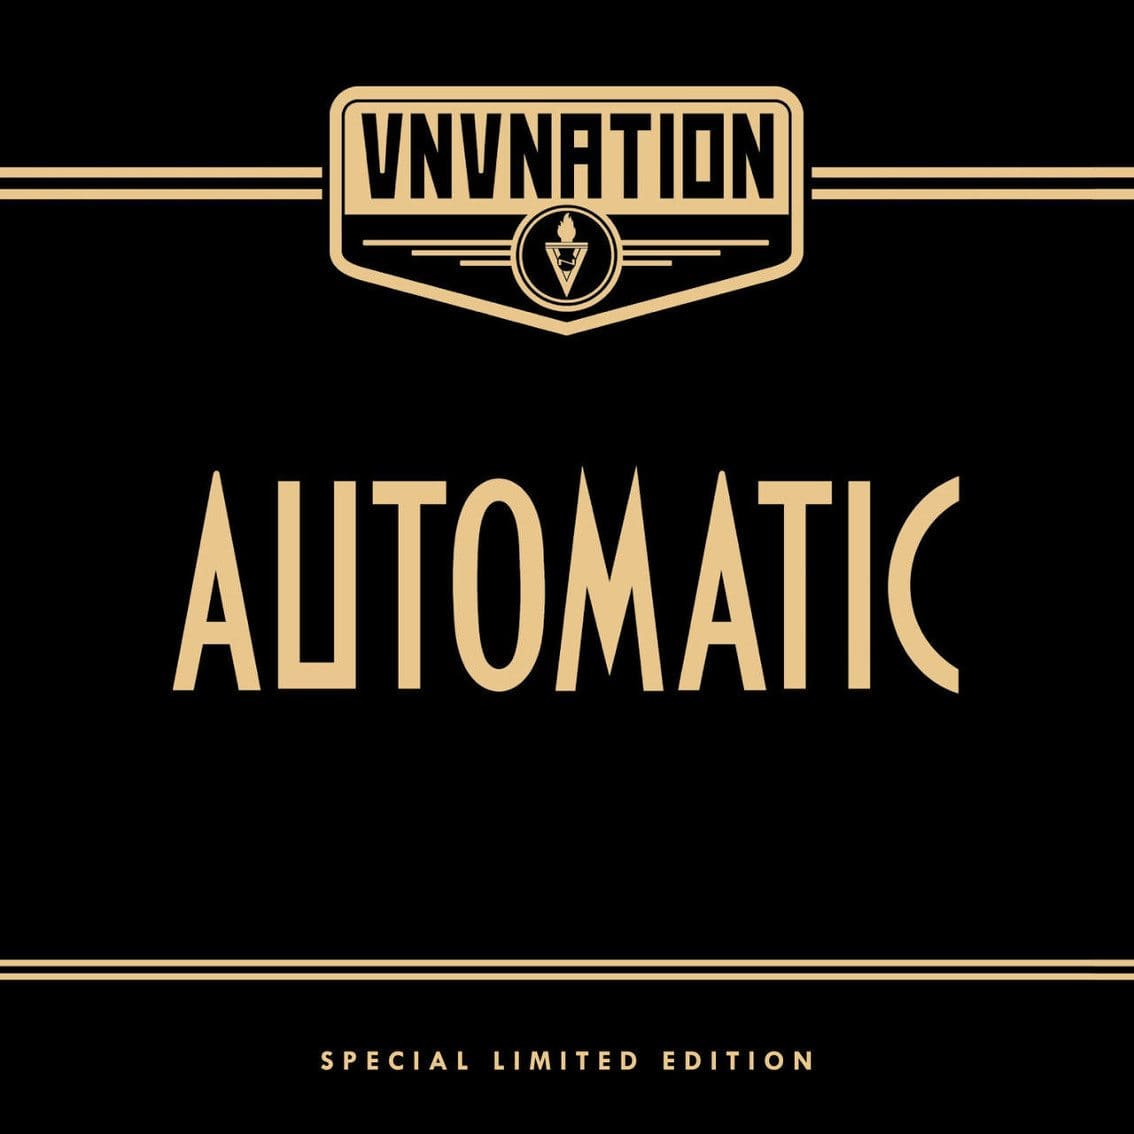 VNV Nation reissues'Automatic' on double vinyl (clear/transparent + black) - limited number of copies available